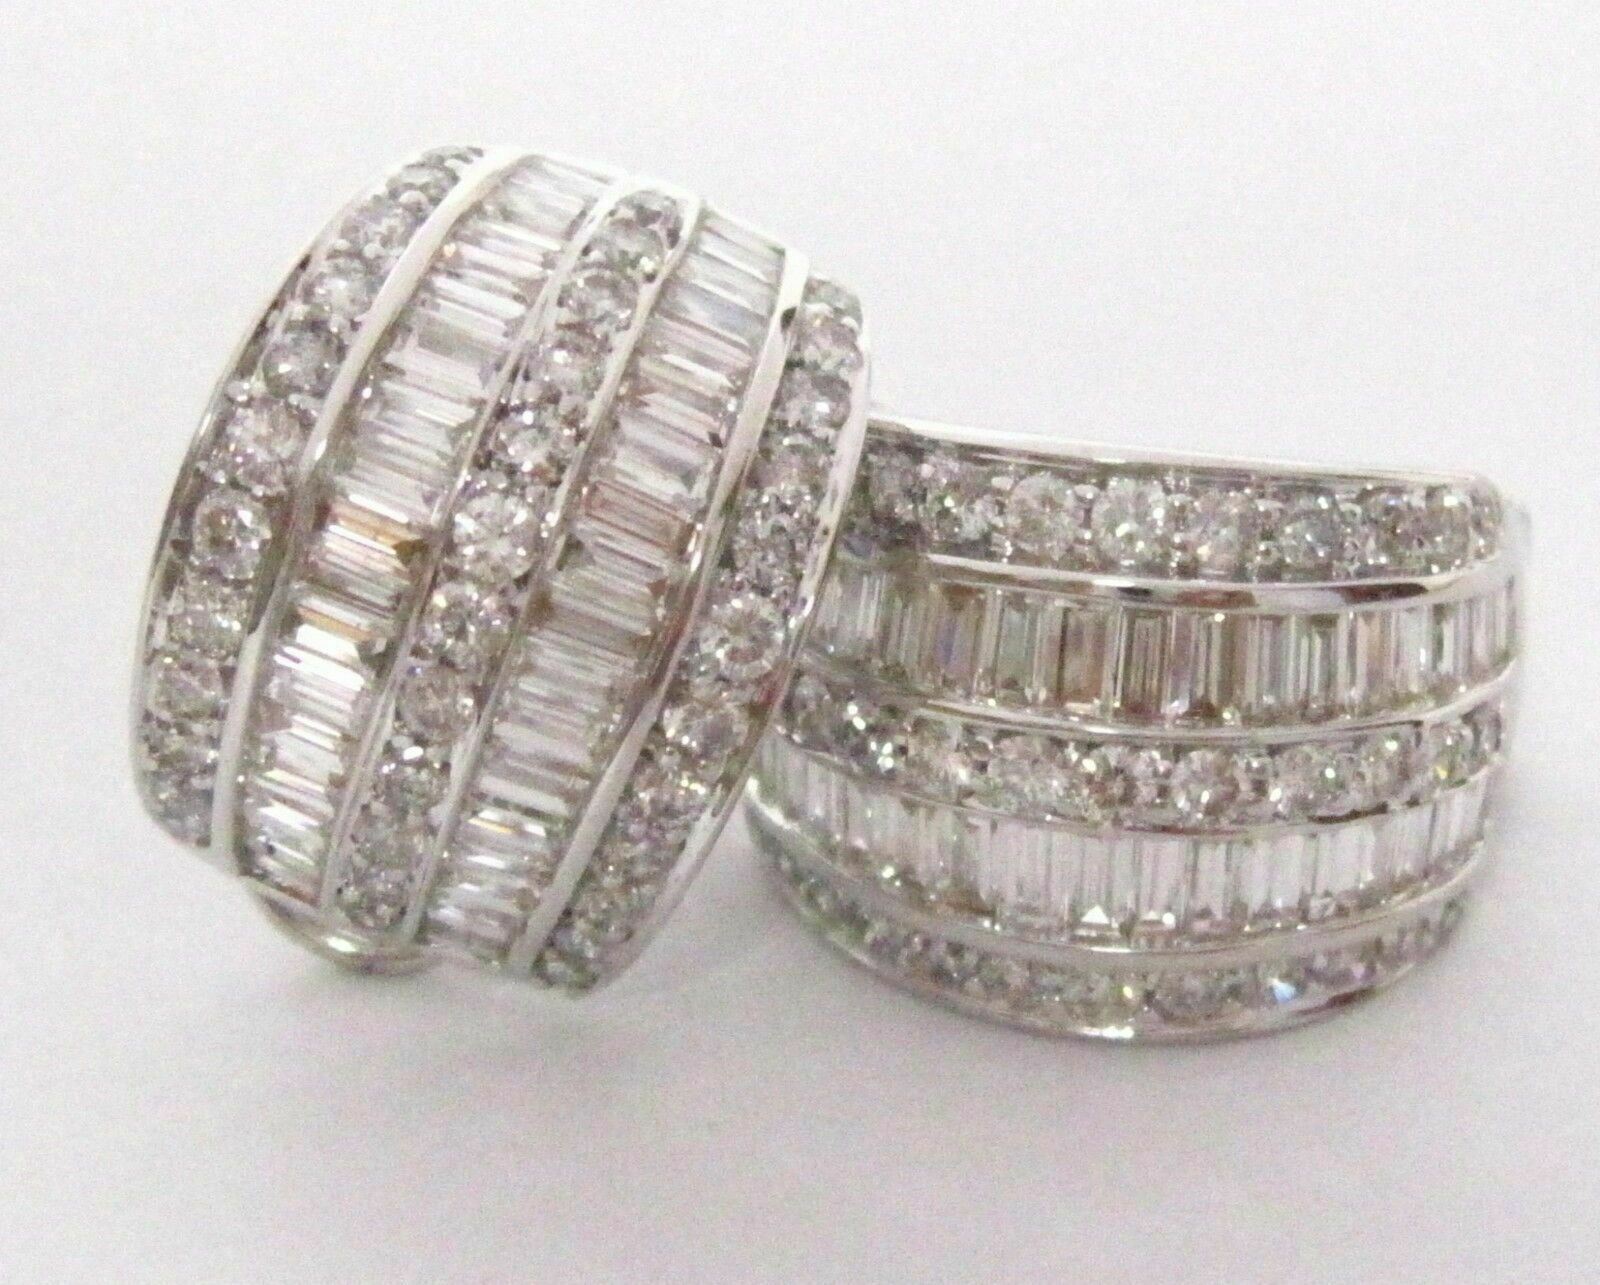 4.15 TCW Natural Baguette and Round Brilliant Diamond Huggie Earrings 14k W/G